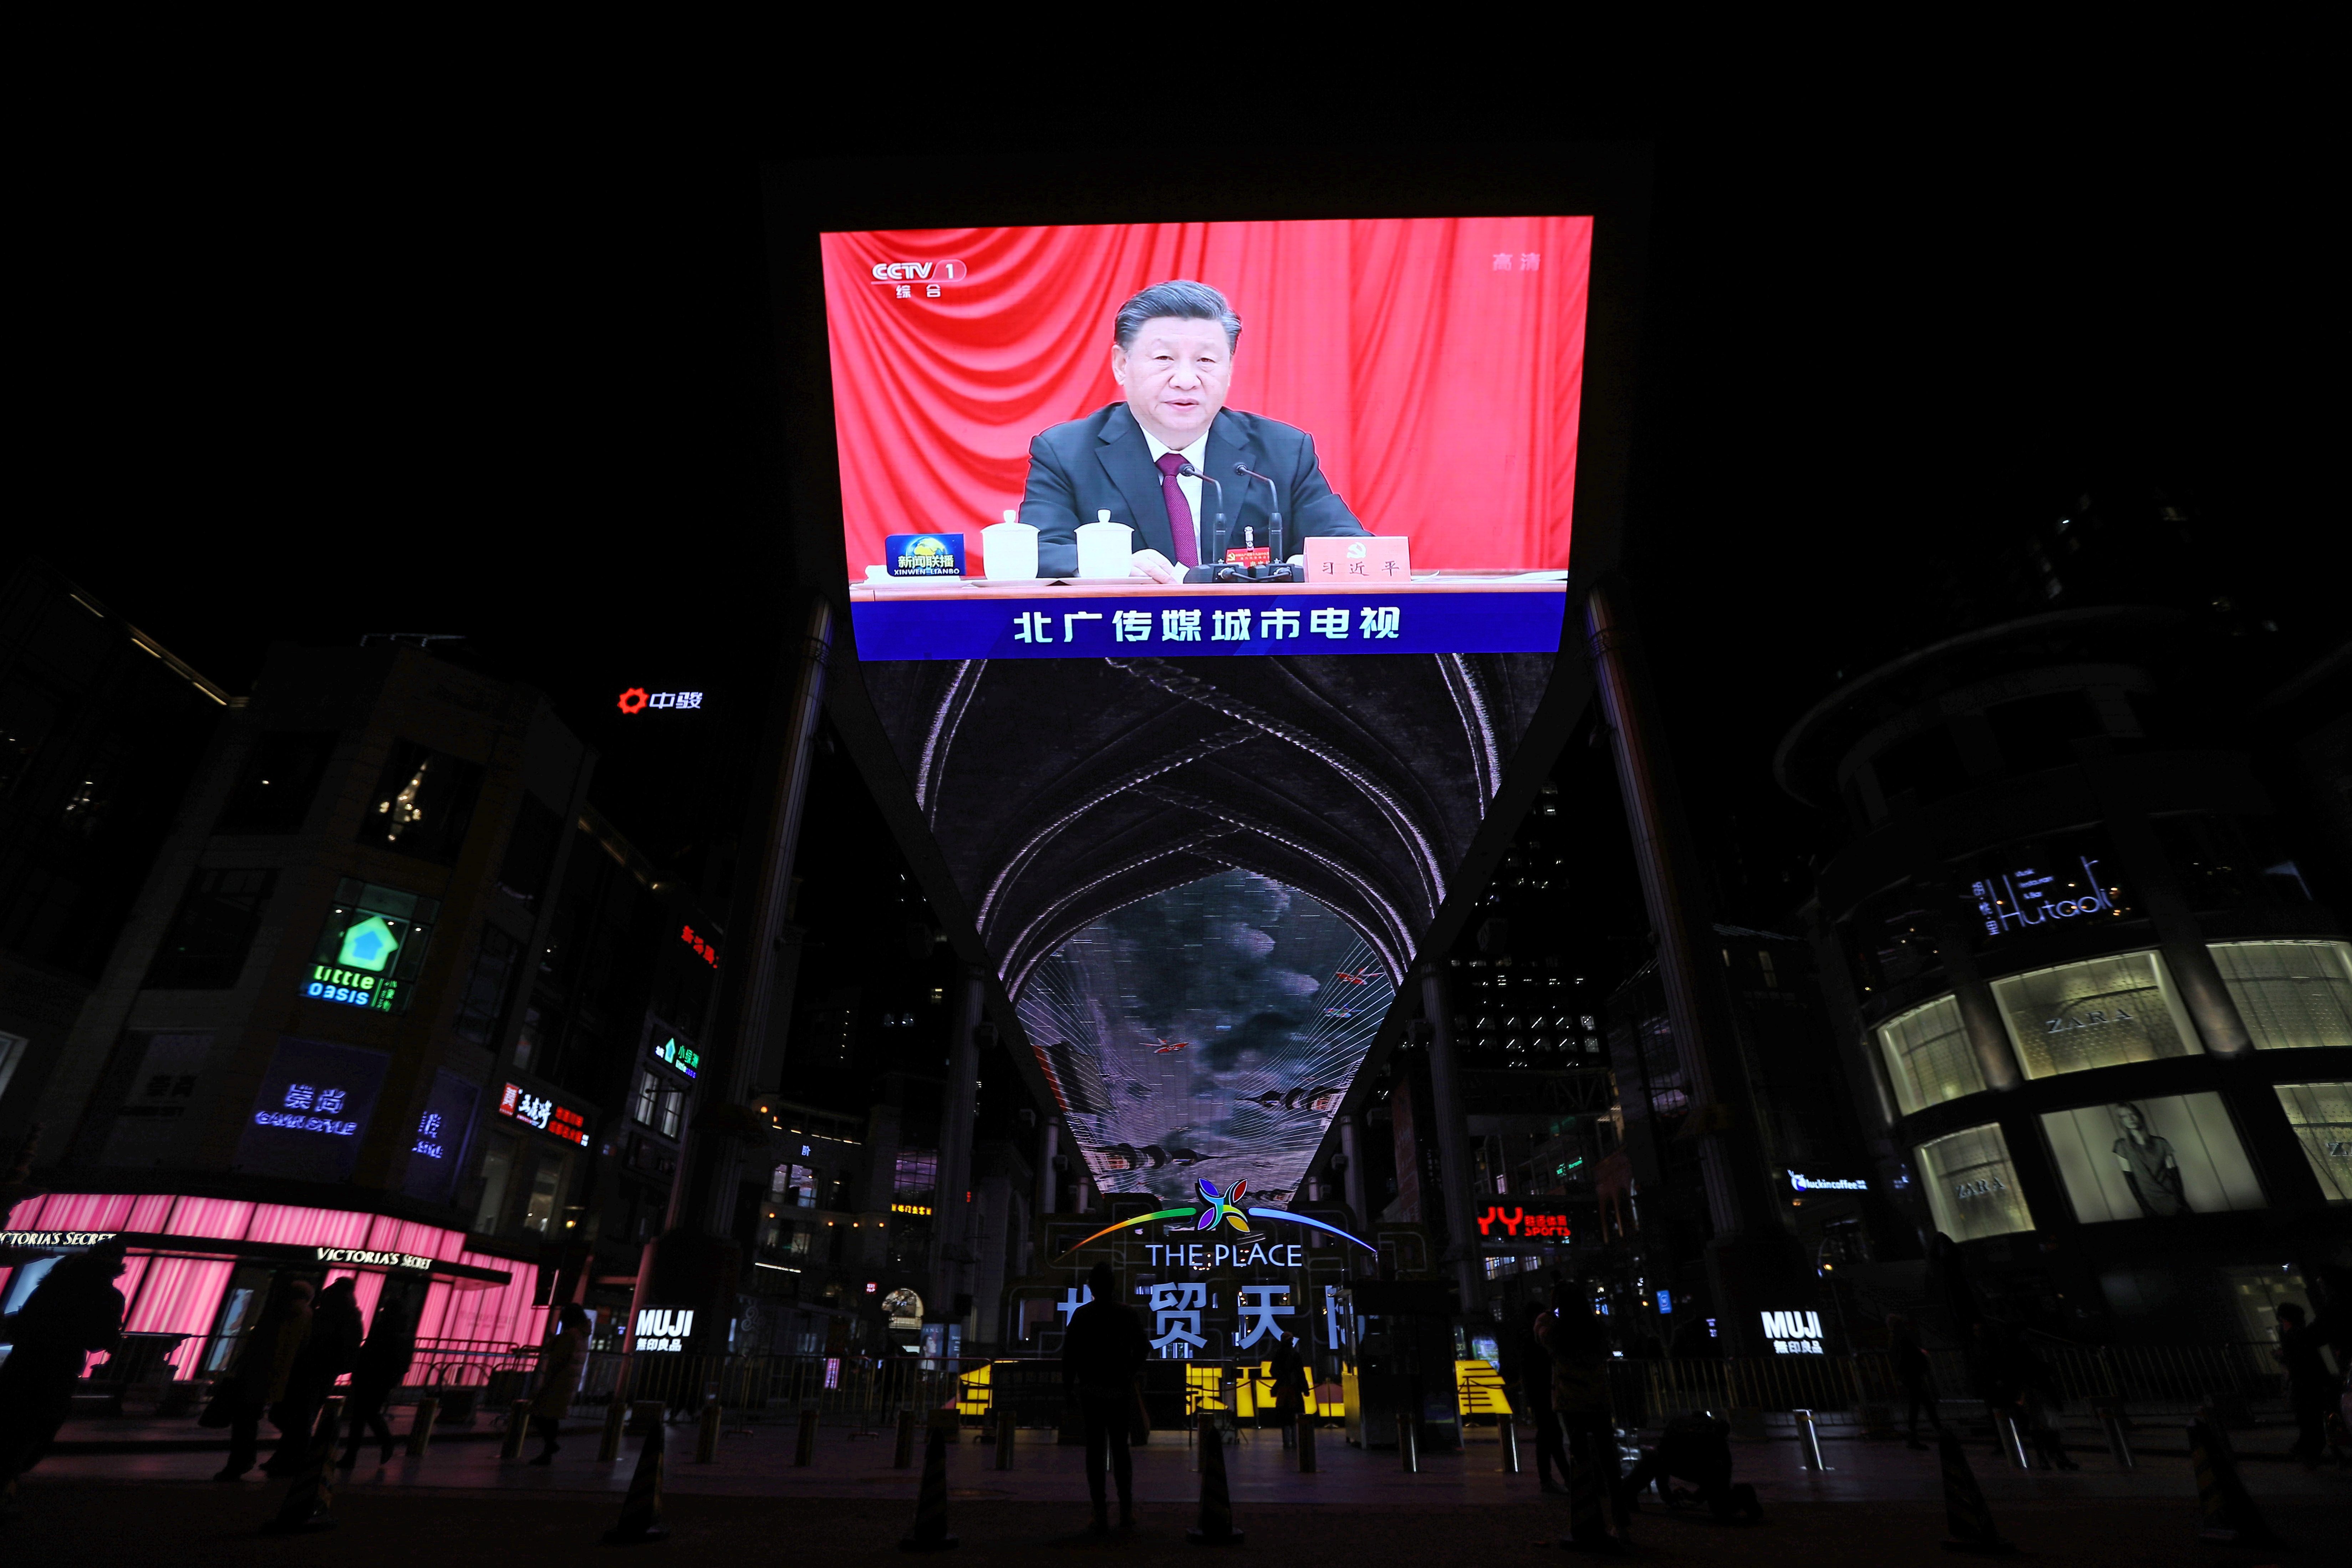 China’s Communist Party passes resolution amplifying President Xi’s authority